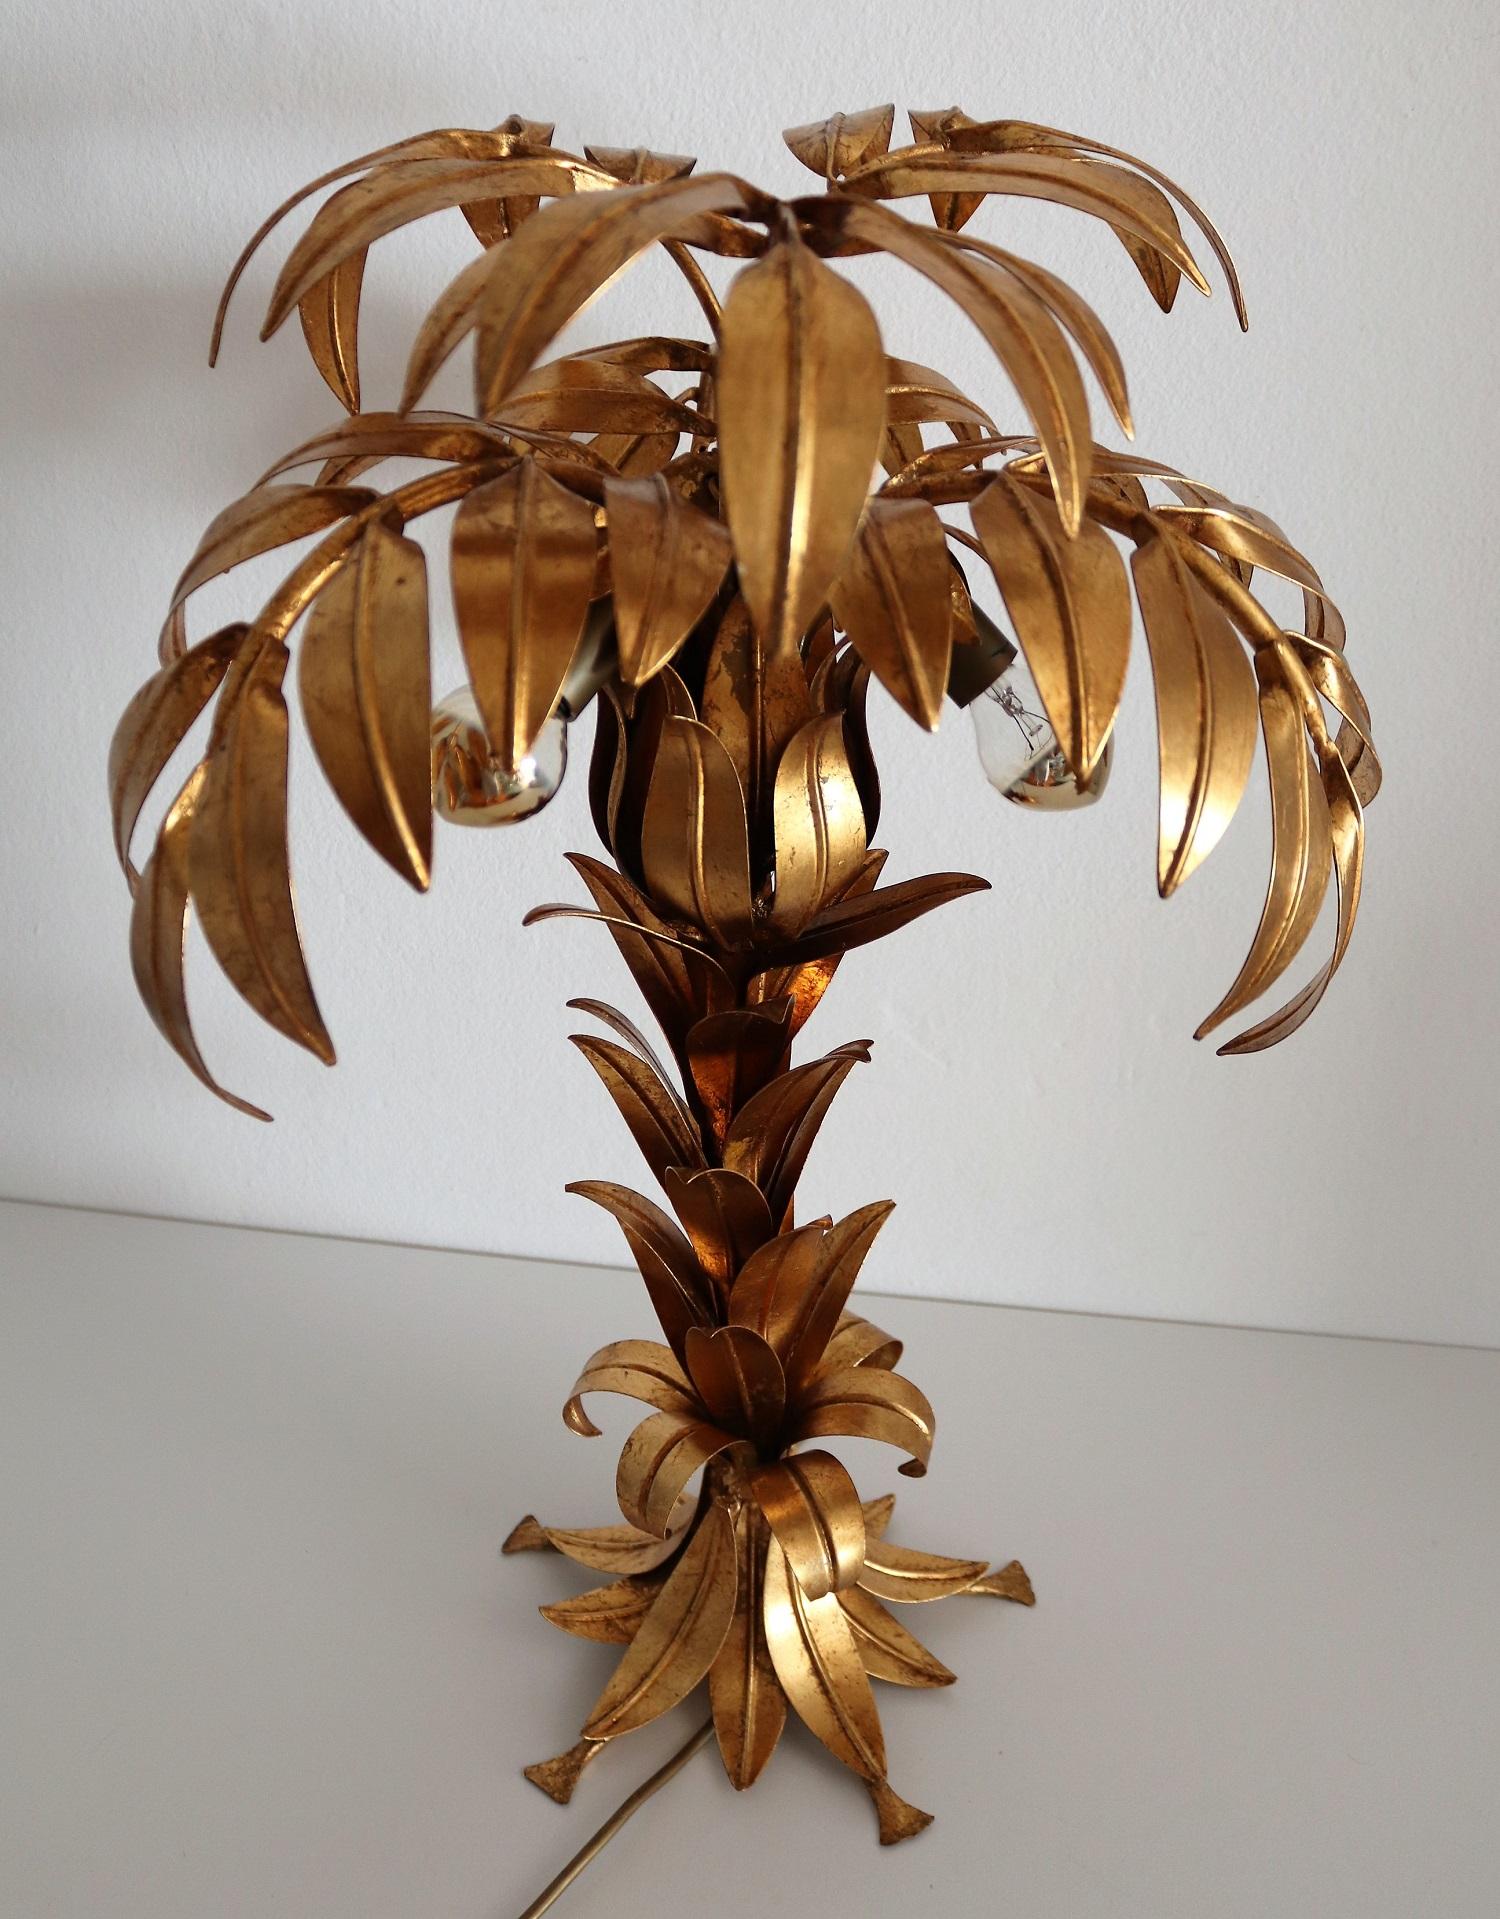 Gorgeous patinated gilt palm tree table lamp by German designer Hans Kögl (Koegl) with three small light sockets.
Wonderful eye-catcher in any Hollywood Regency style and mid-century interior.
Very good to excellent original condition.